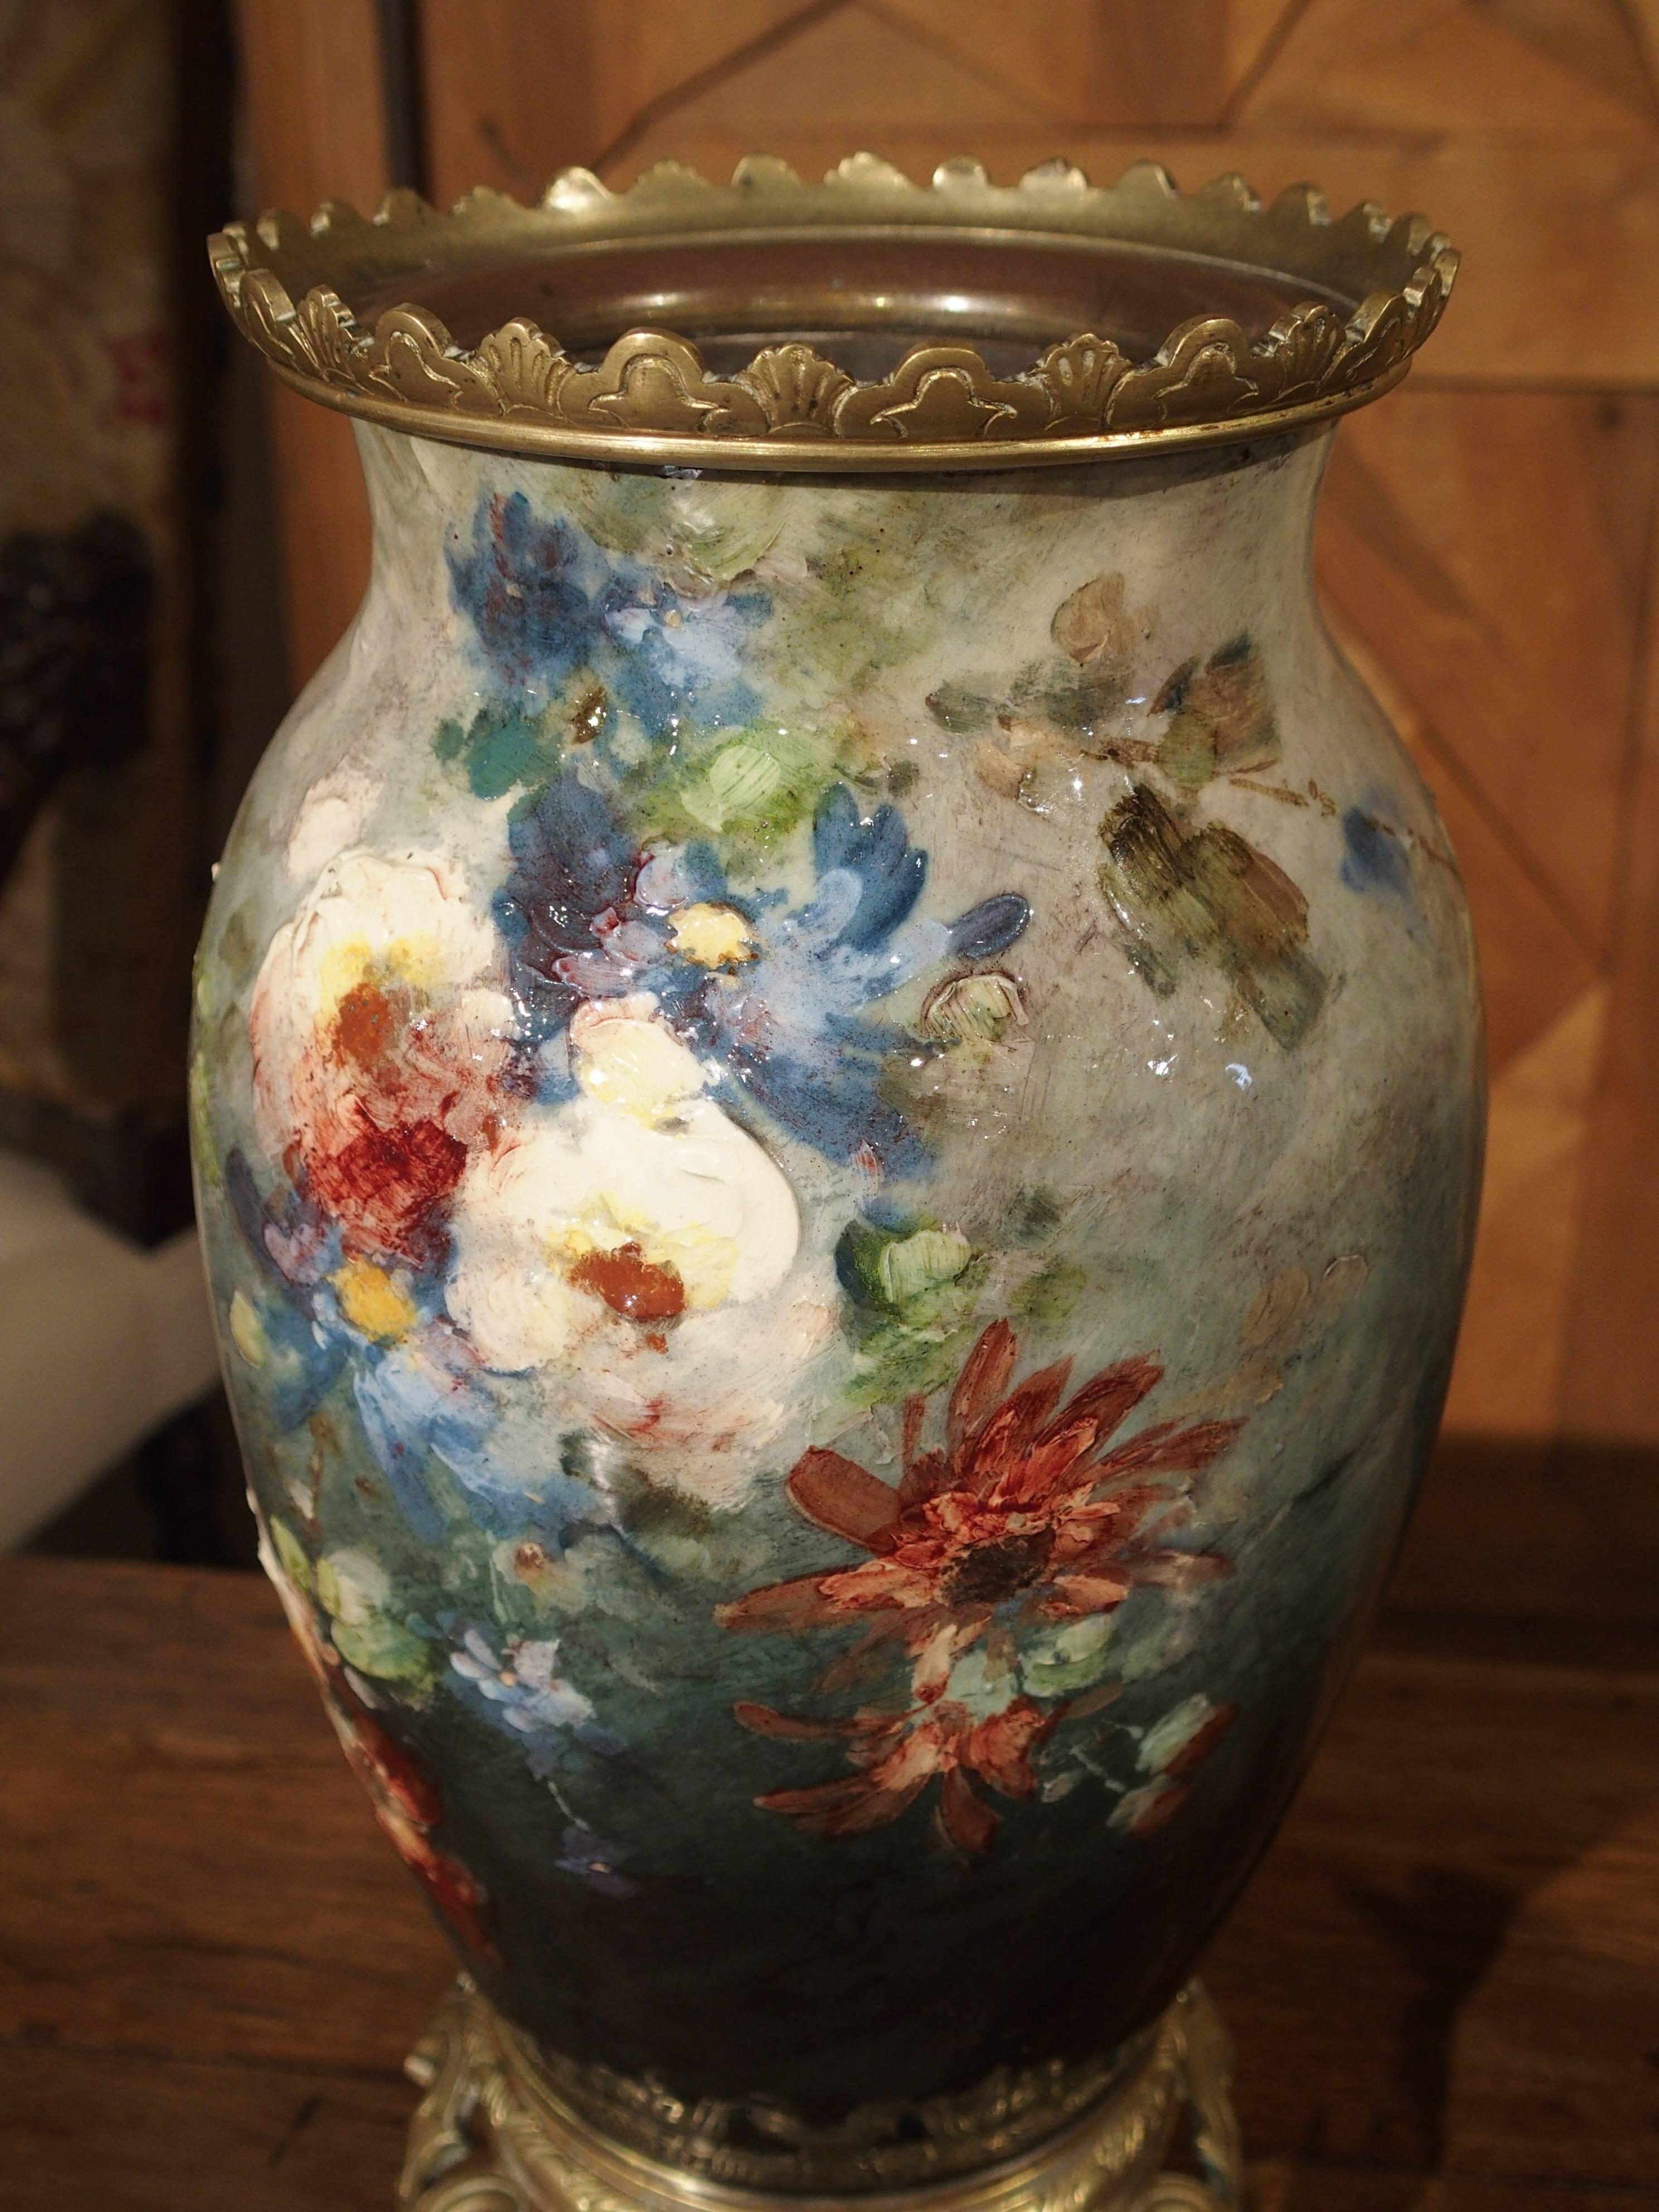 Theodore LeFront bagan working with Faience (tin glazed earthenware), Barbotine (earthenware decorated with colored liquid slips in an impasto style inspired by Impressionism) and porcelain in an atelier in Fontainbleau in 1860. He had several